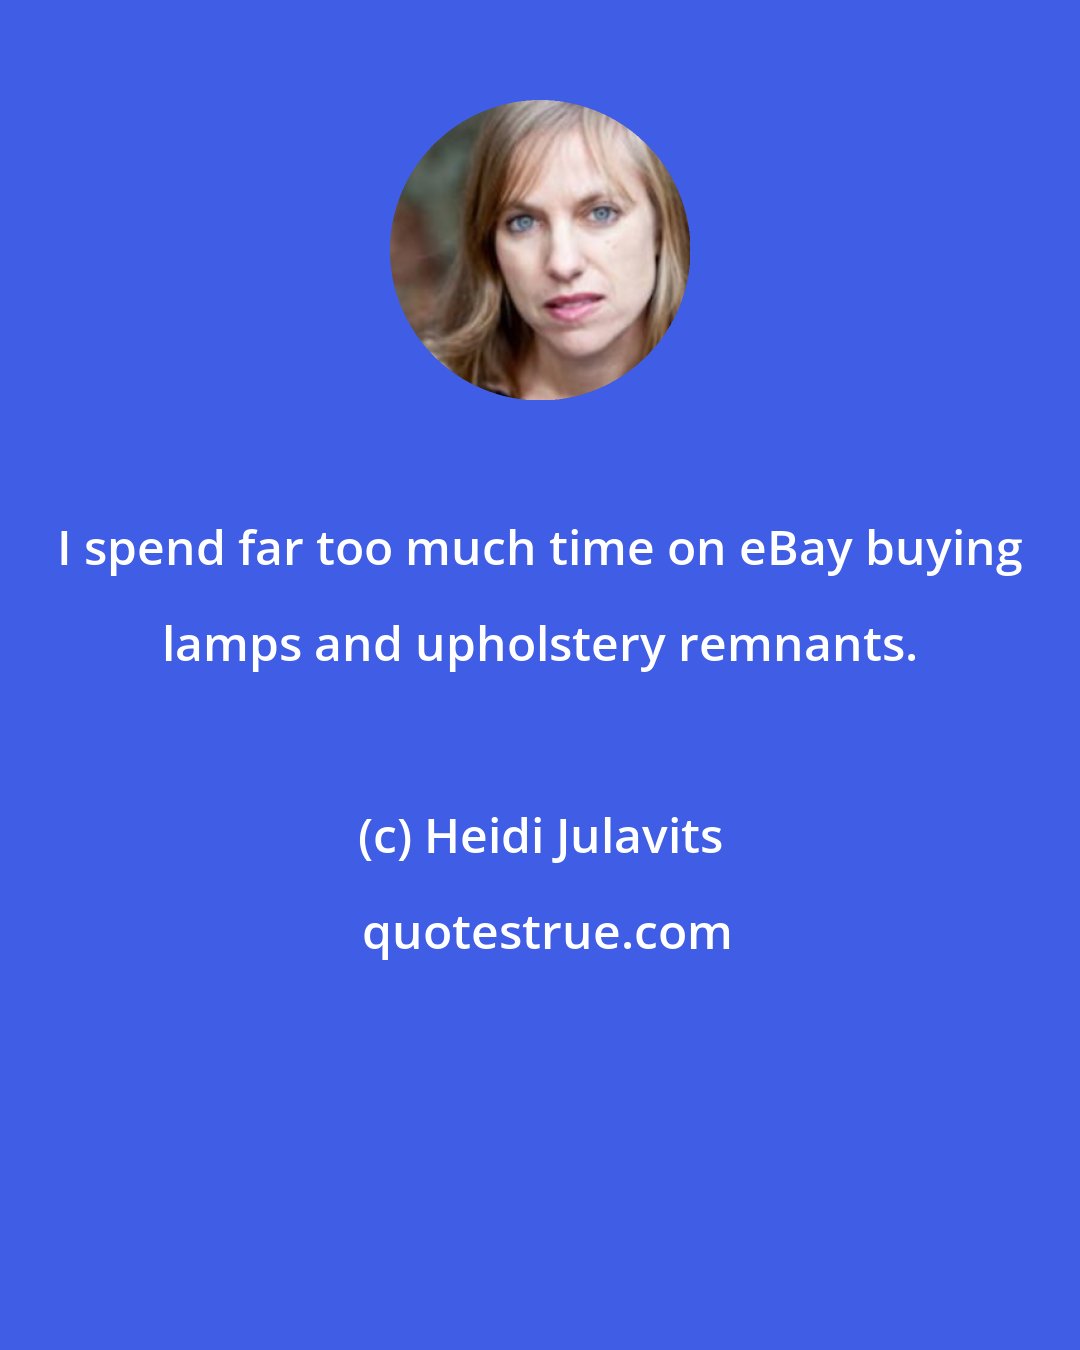 Heidi Julavits: I spend far too much time on eBay buying lamps and upholstery remnants.